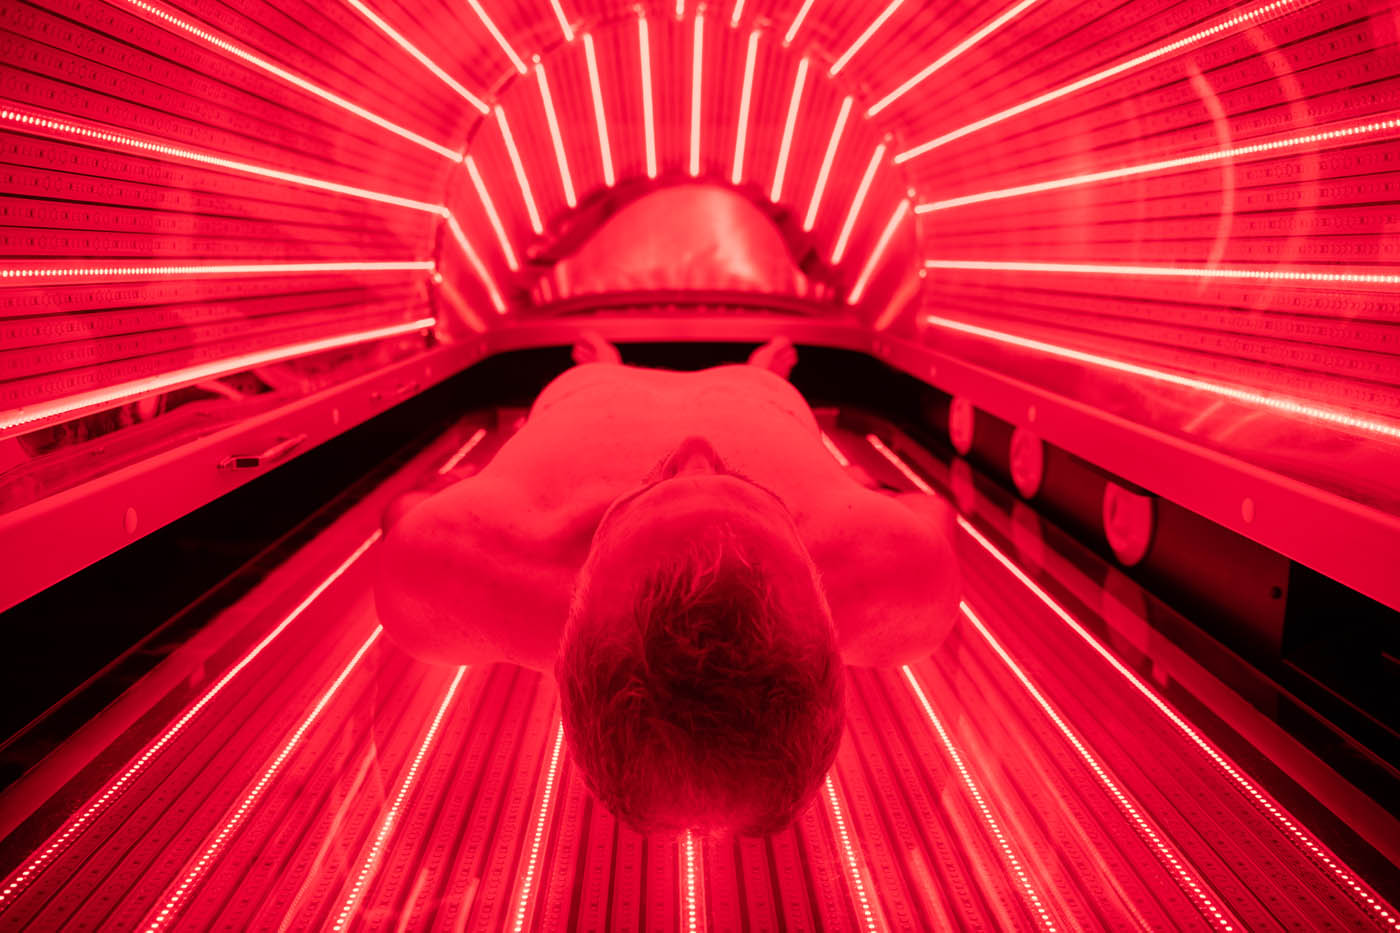 A man getting into a dark pod with bright red light, contact Light Lounge today for your infrared light therapy in Lehi.